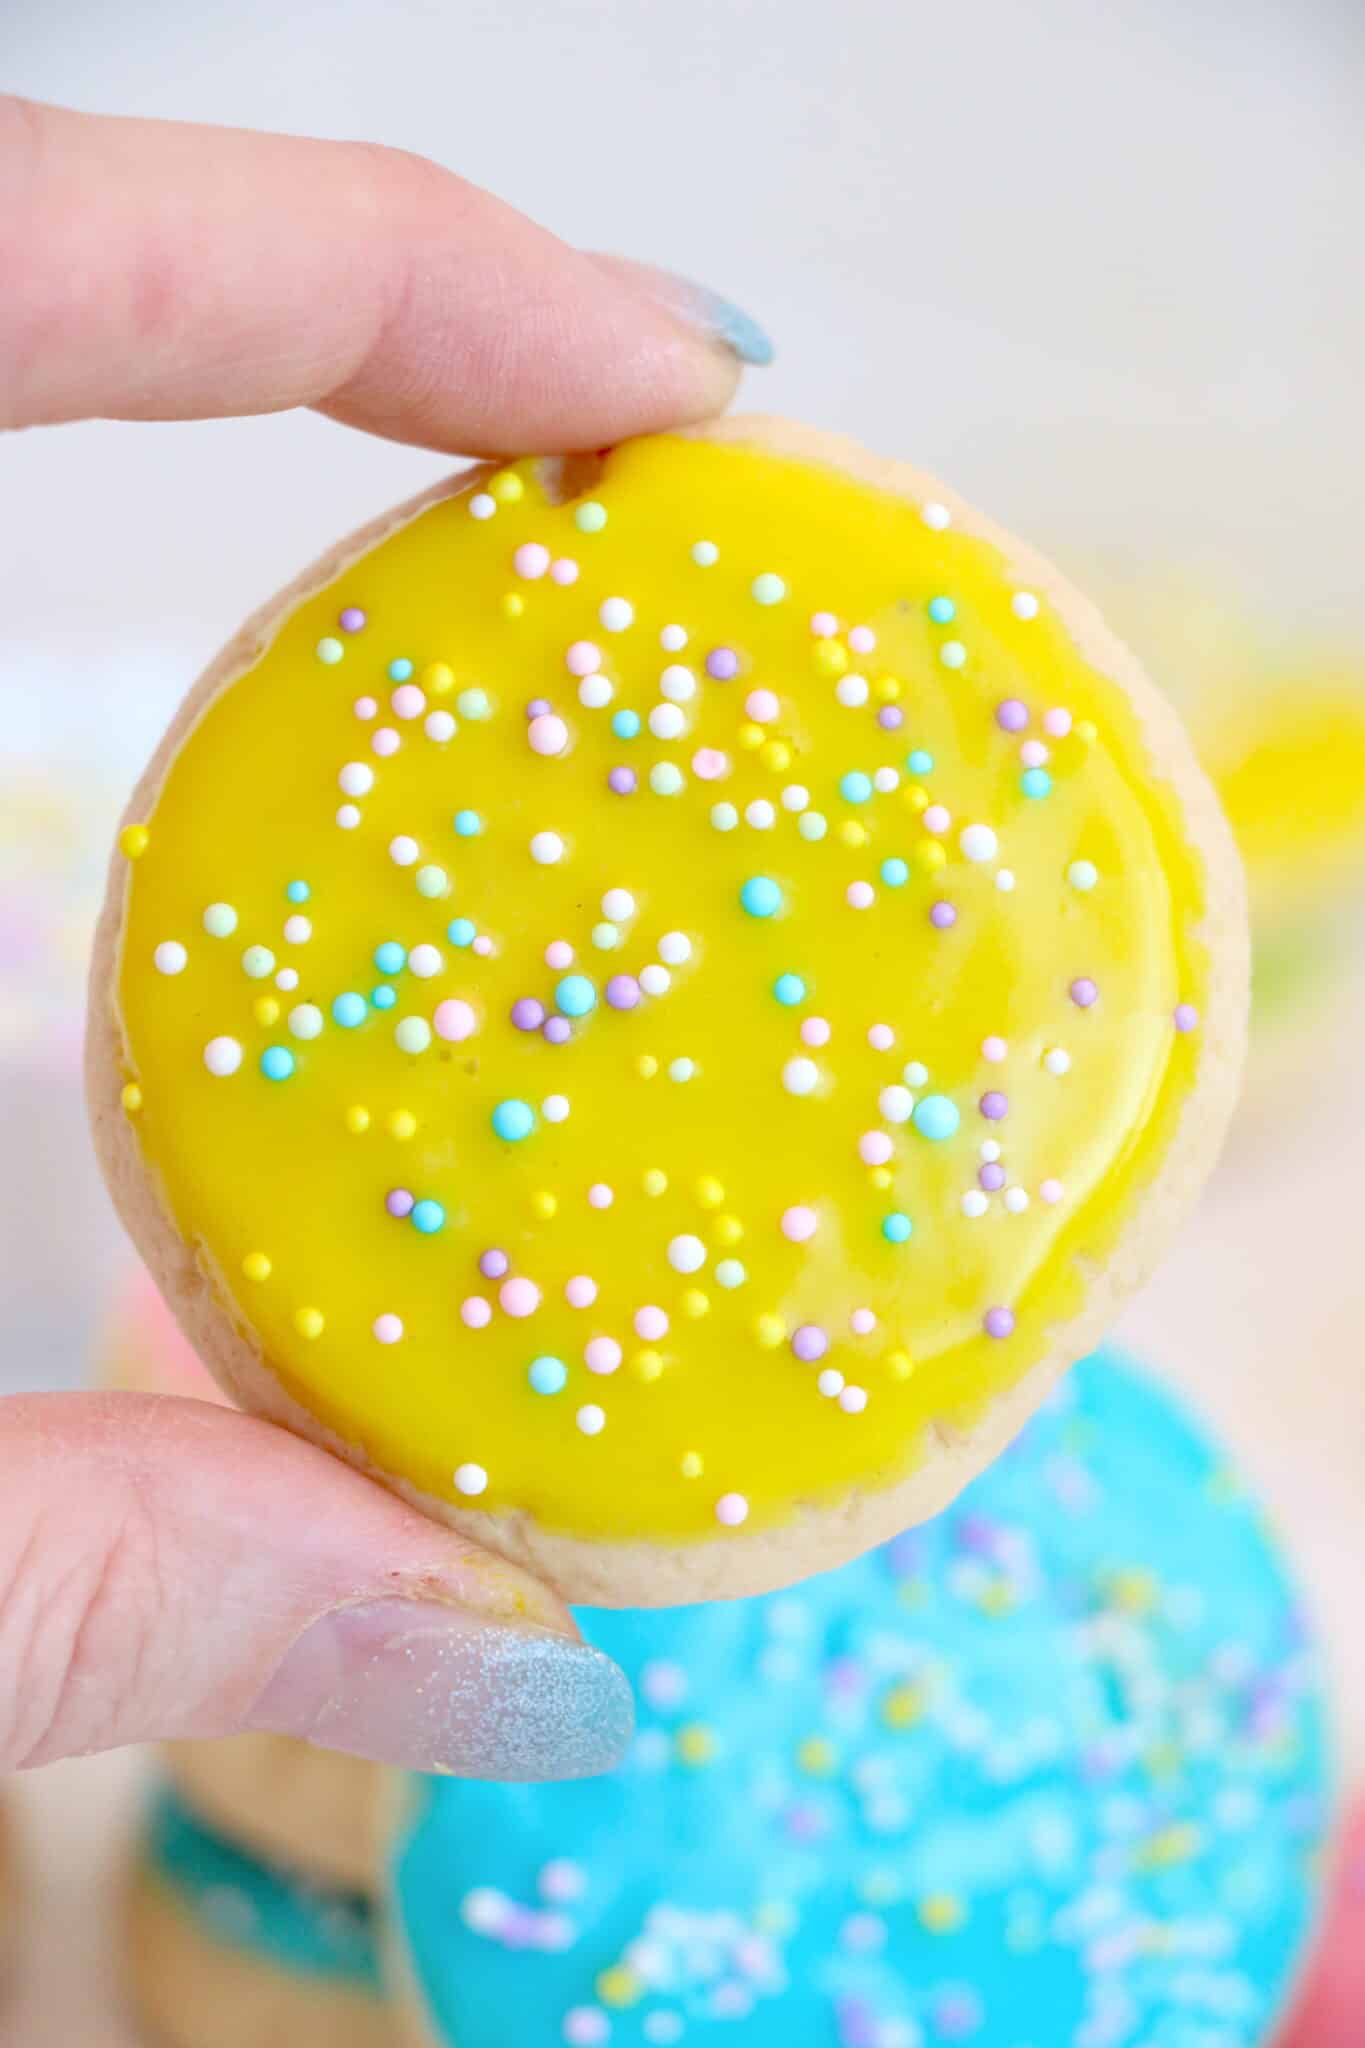 One of the yellow Easter sugar cookies.